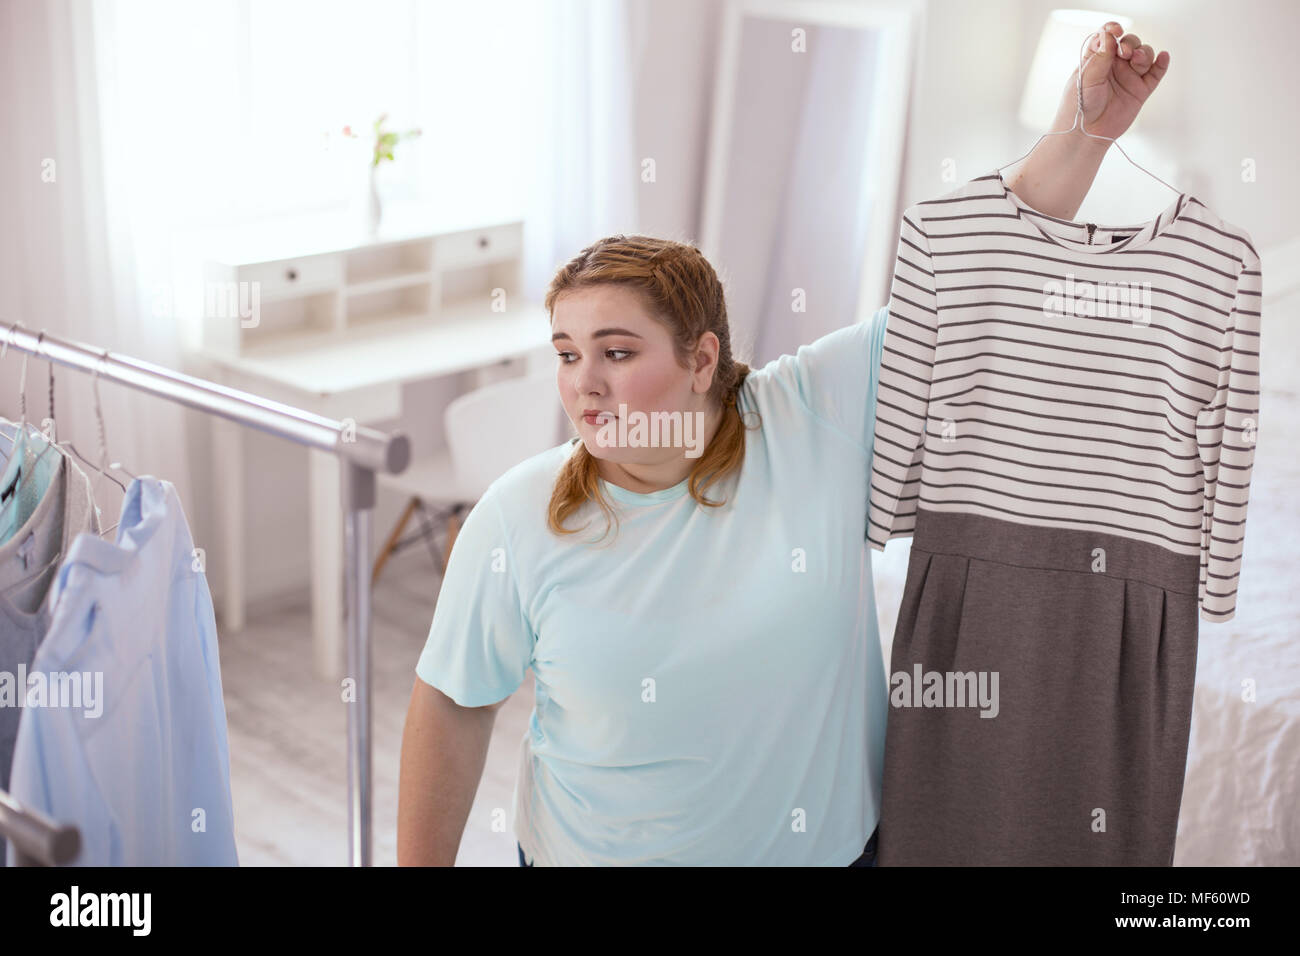 Sad plump woman disappointing in her choice Stock Photo